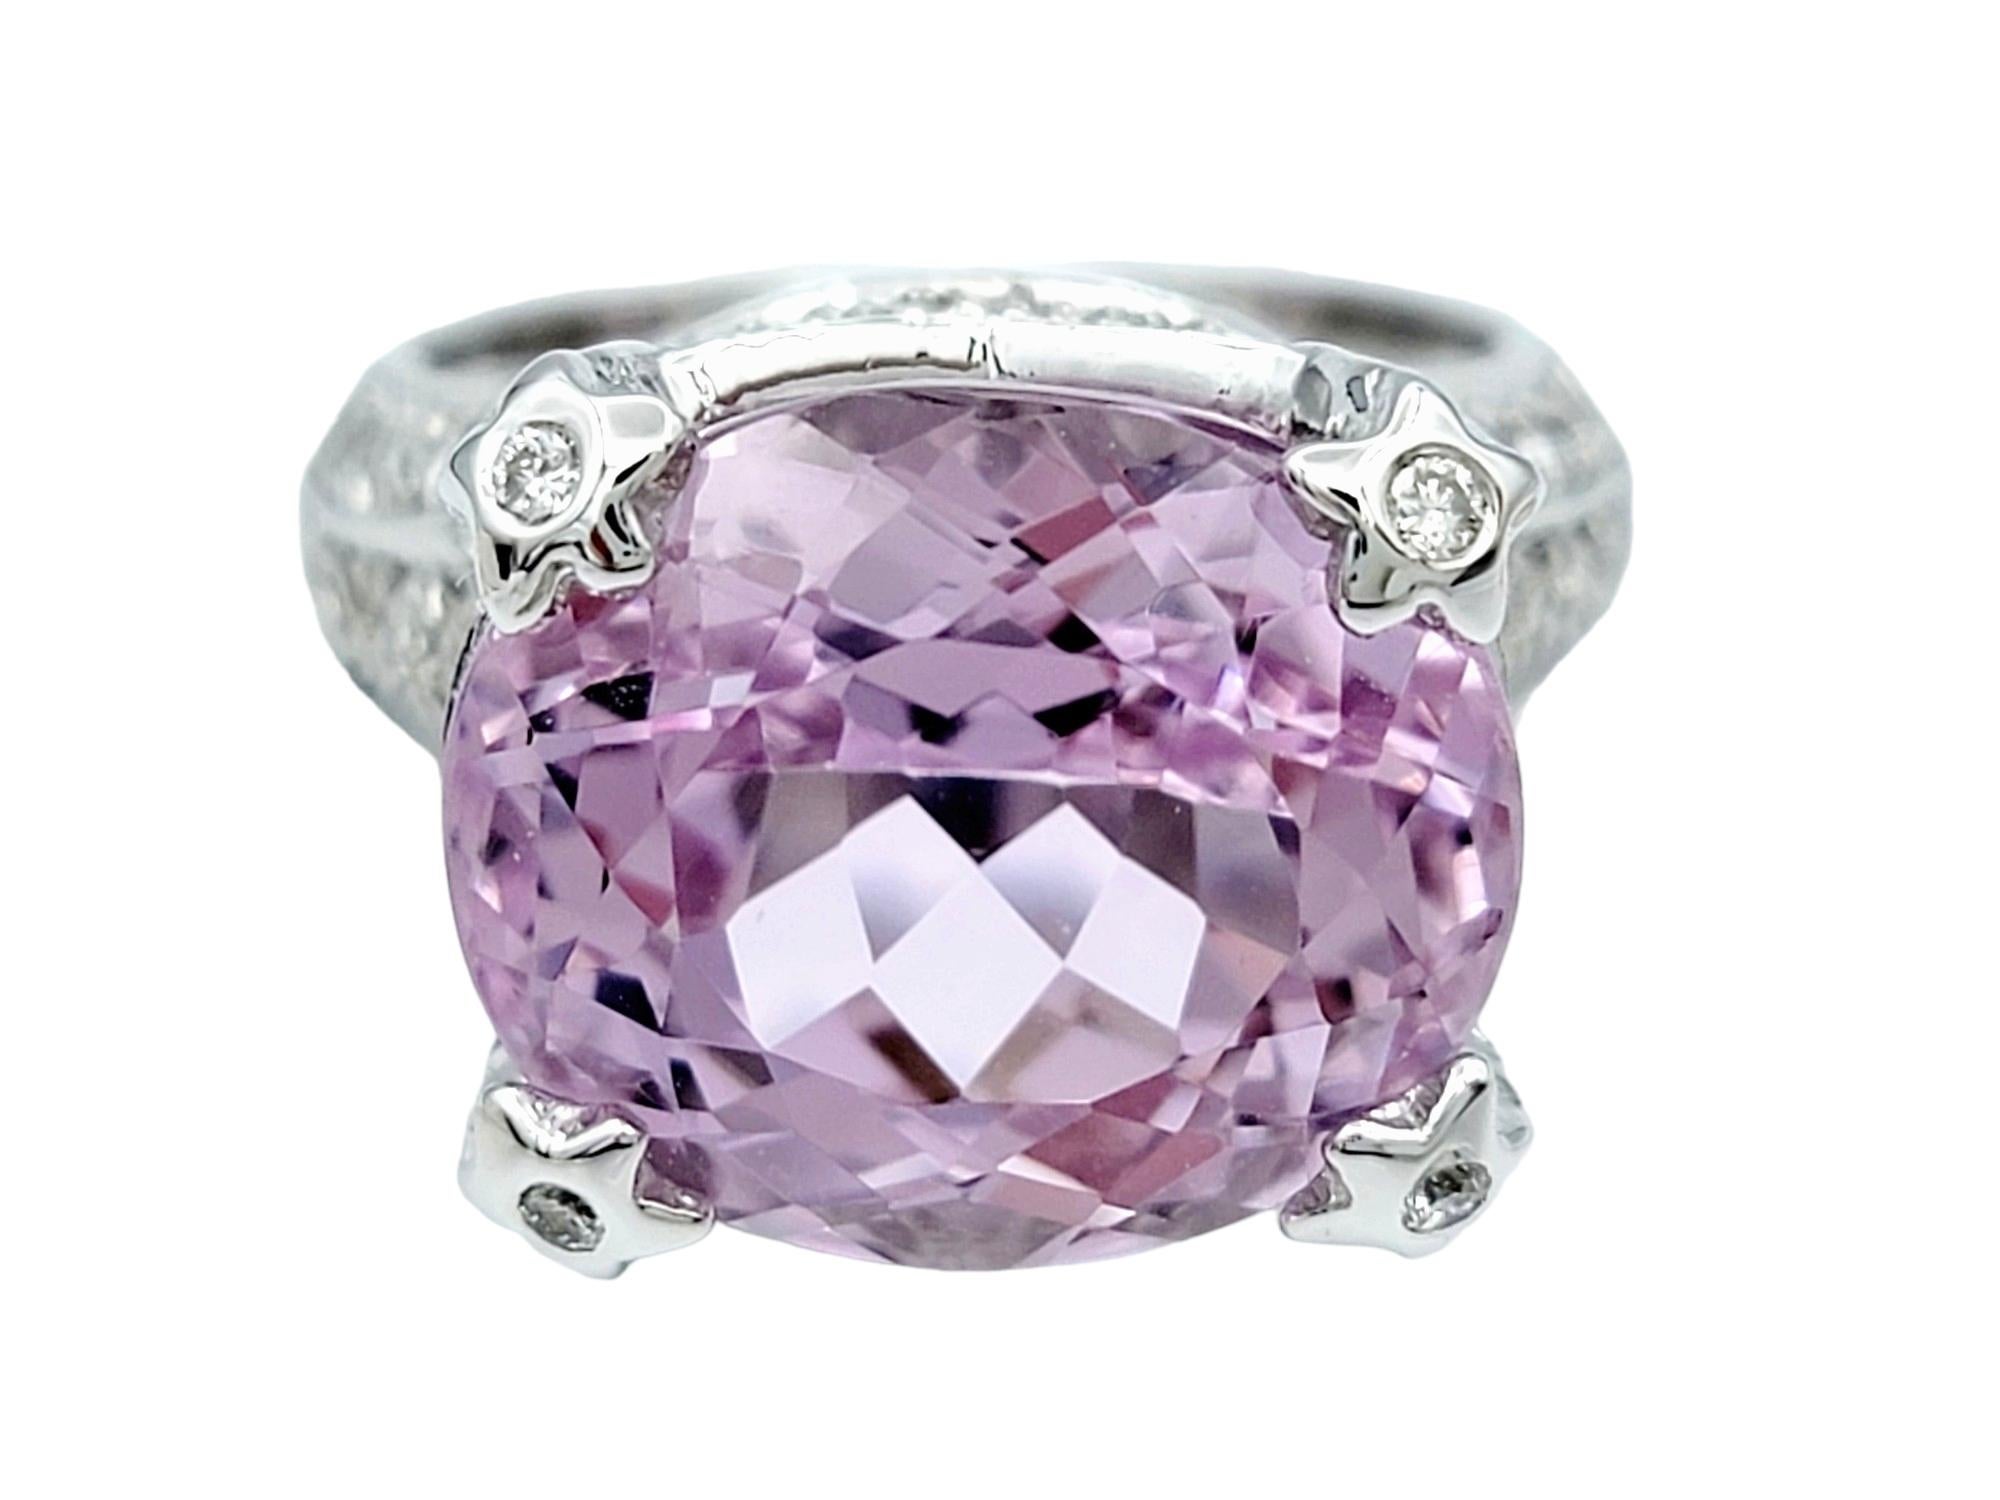 Ring size: 5.75

This scintillating ring by Sonia B. features an artfully detailed pave diamond band surrounding a sensational 9.95 carat pink kunzite stone in a luxurious high profile setting. It is breathtaking, ultra feminine and simply gorgeous.